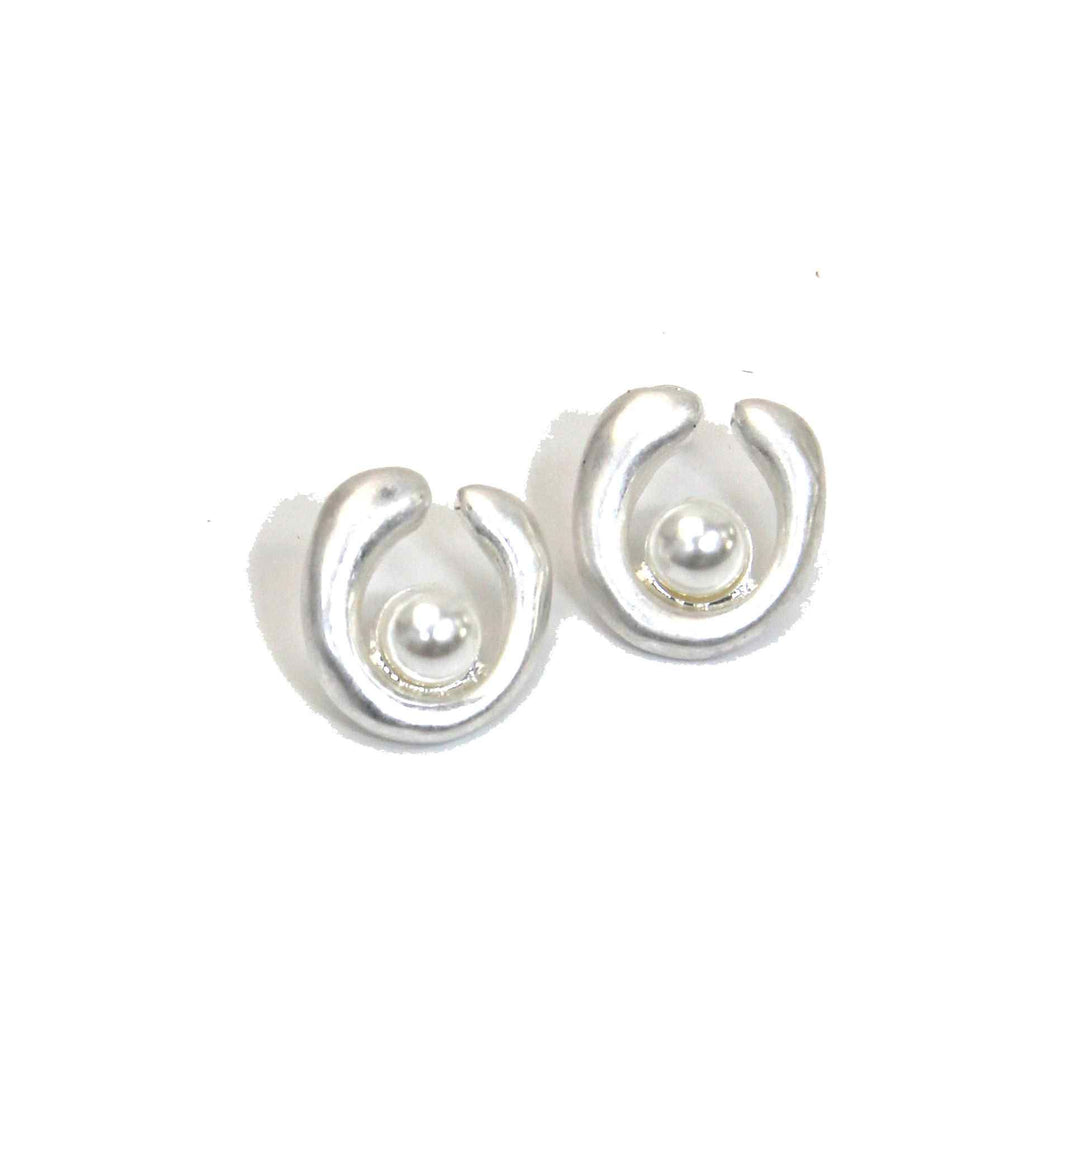 SILVER AND PEARL STONE EARRINGS